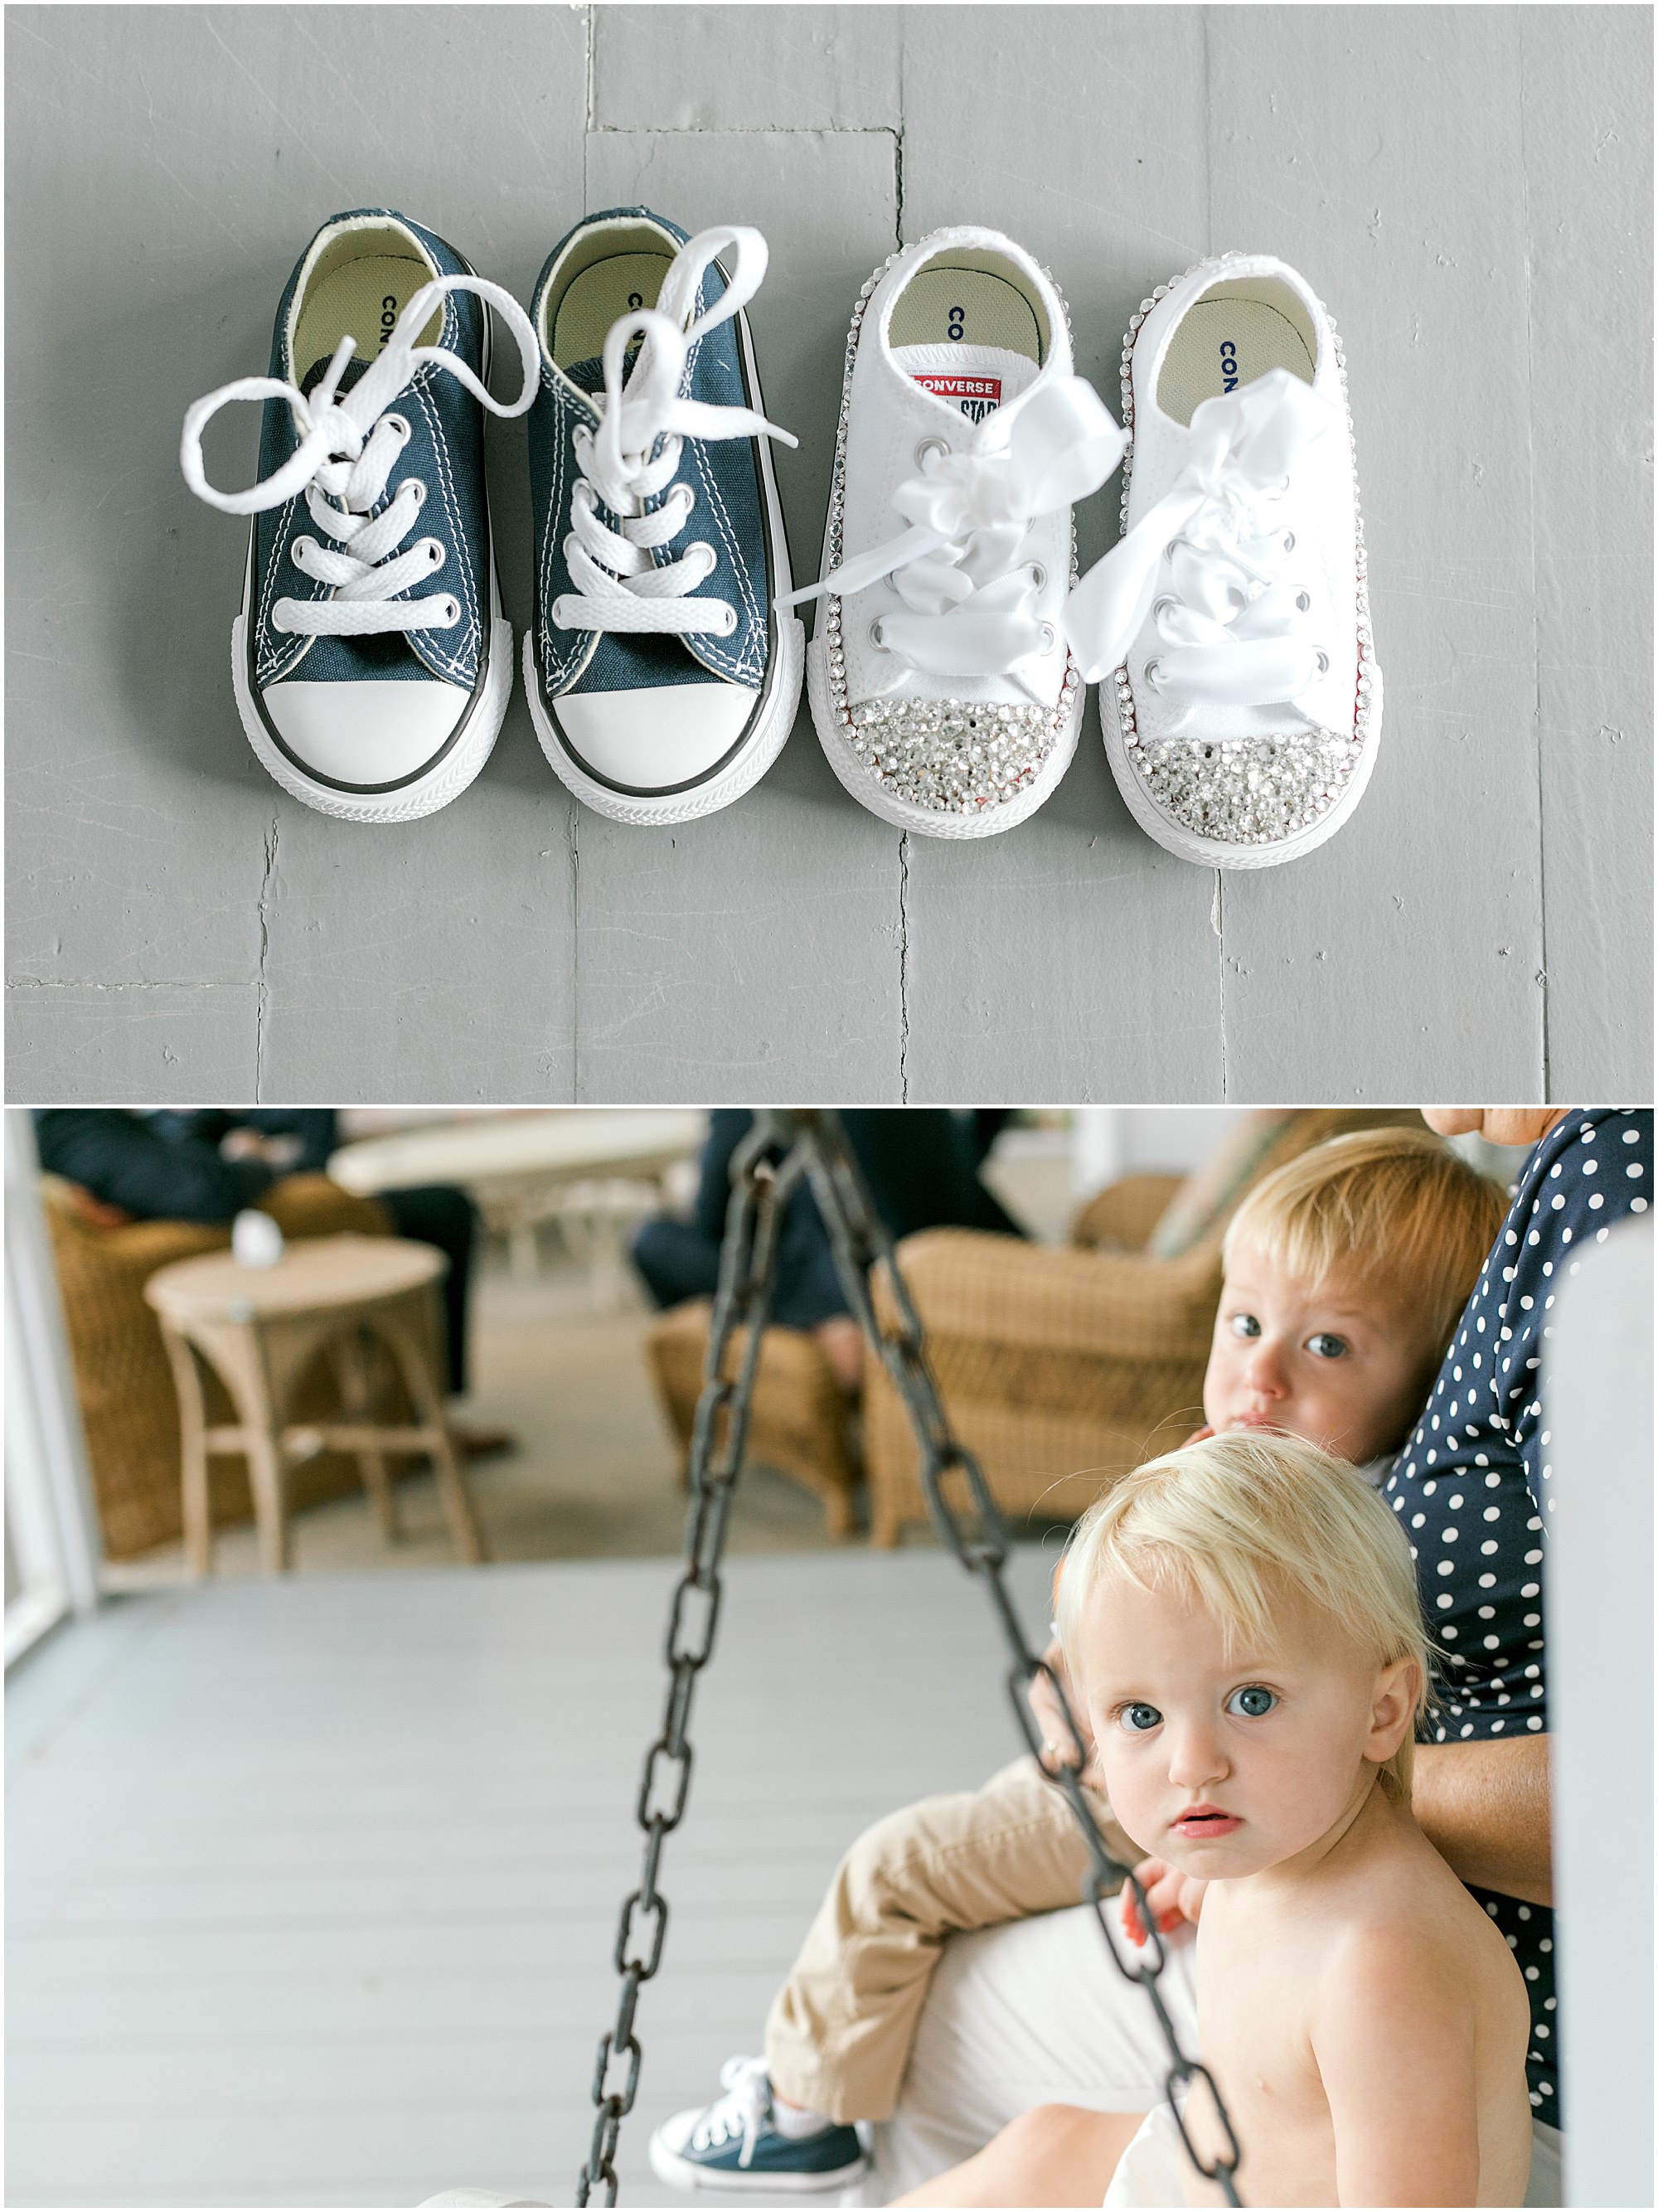 Flower girl and ring bearer shoes at dusty rose and burgundy wedding. 